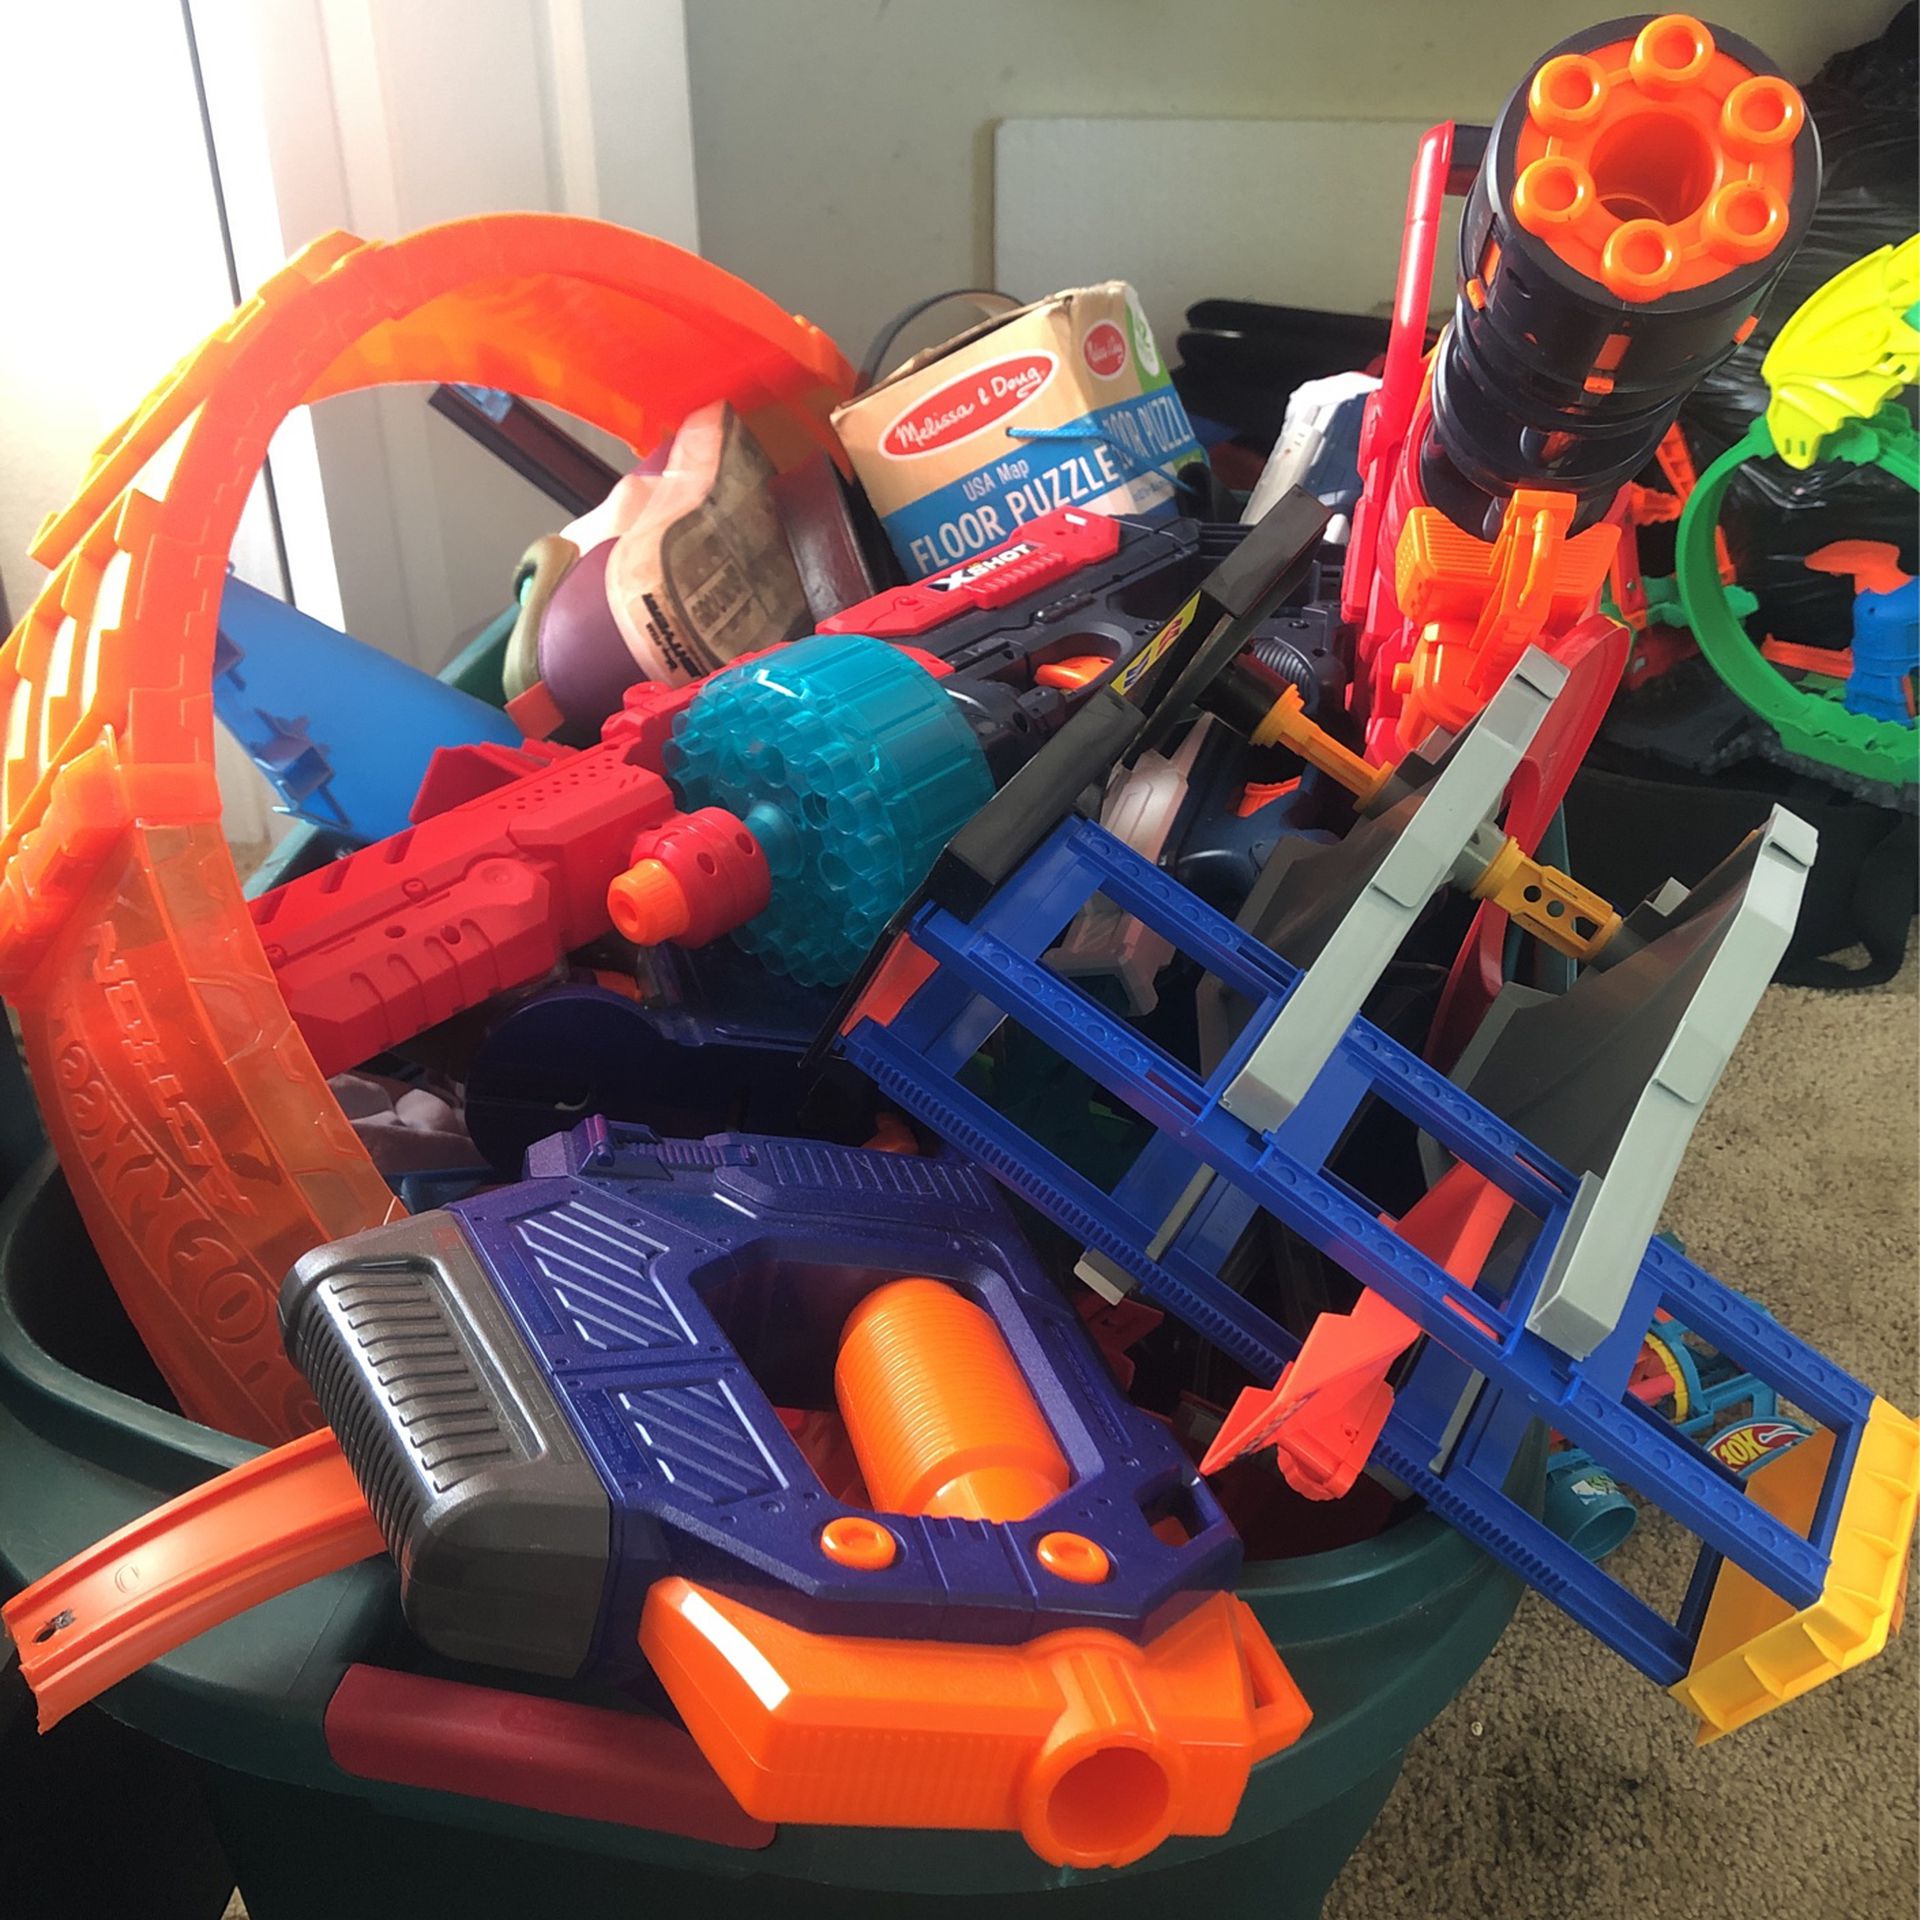 Bucket Overflowing With Random Toys